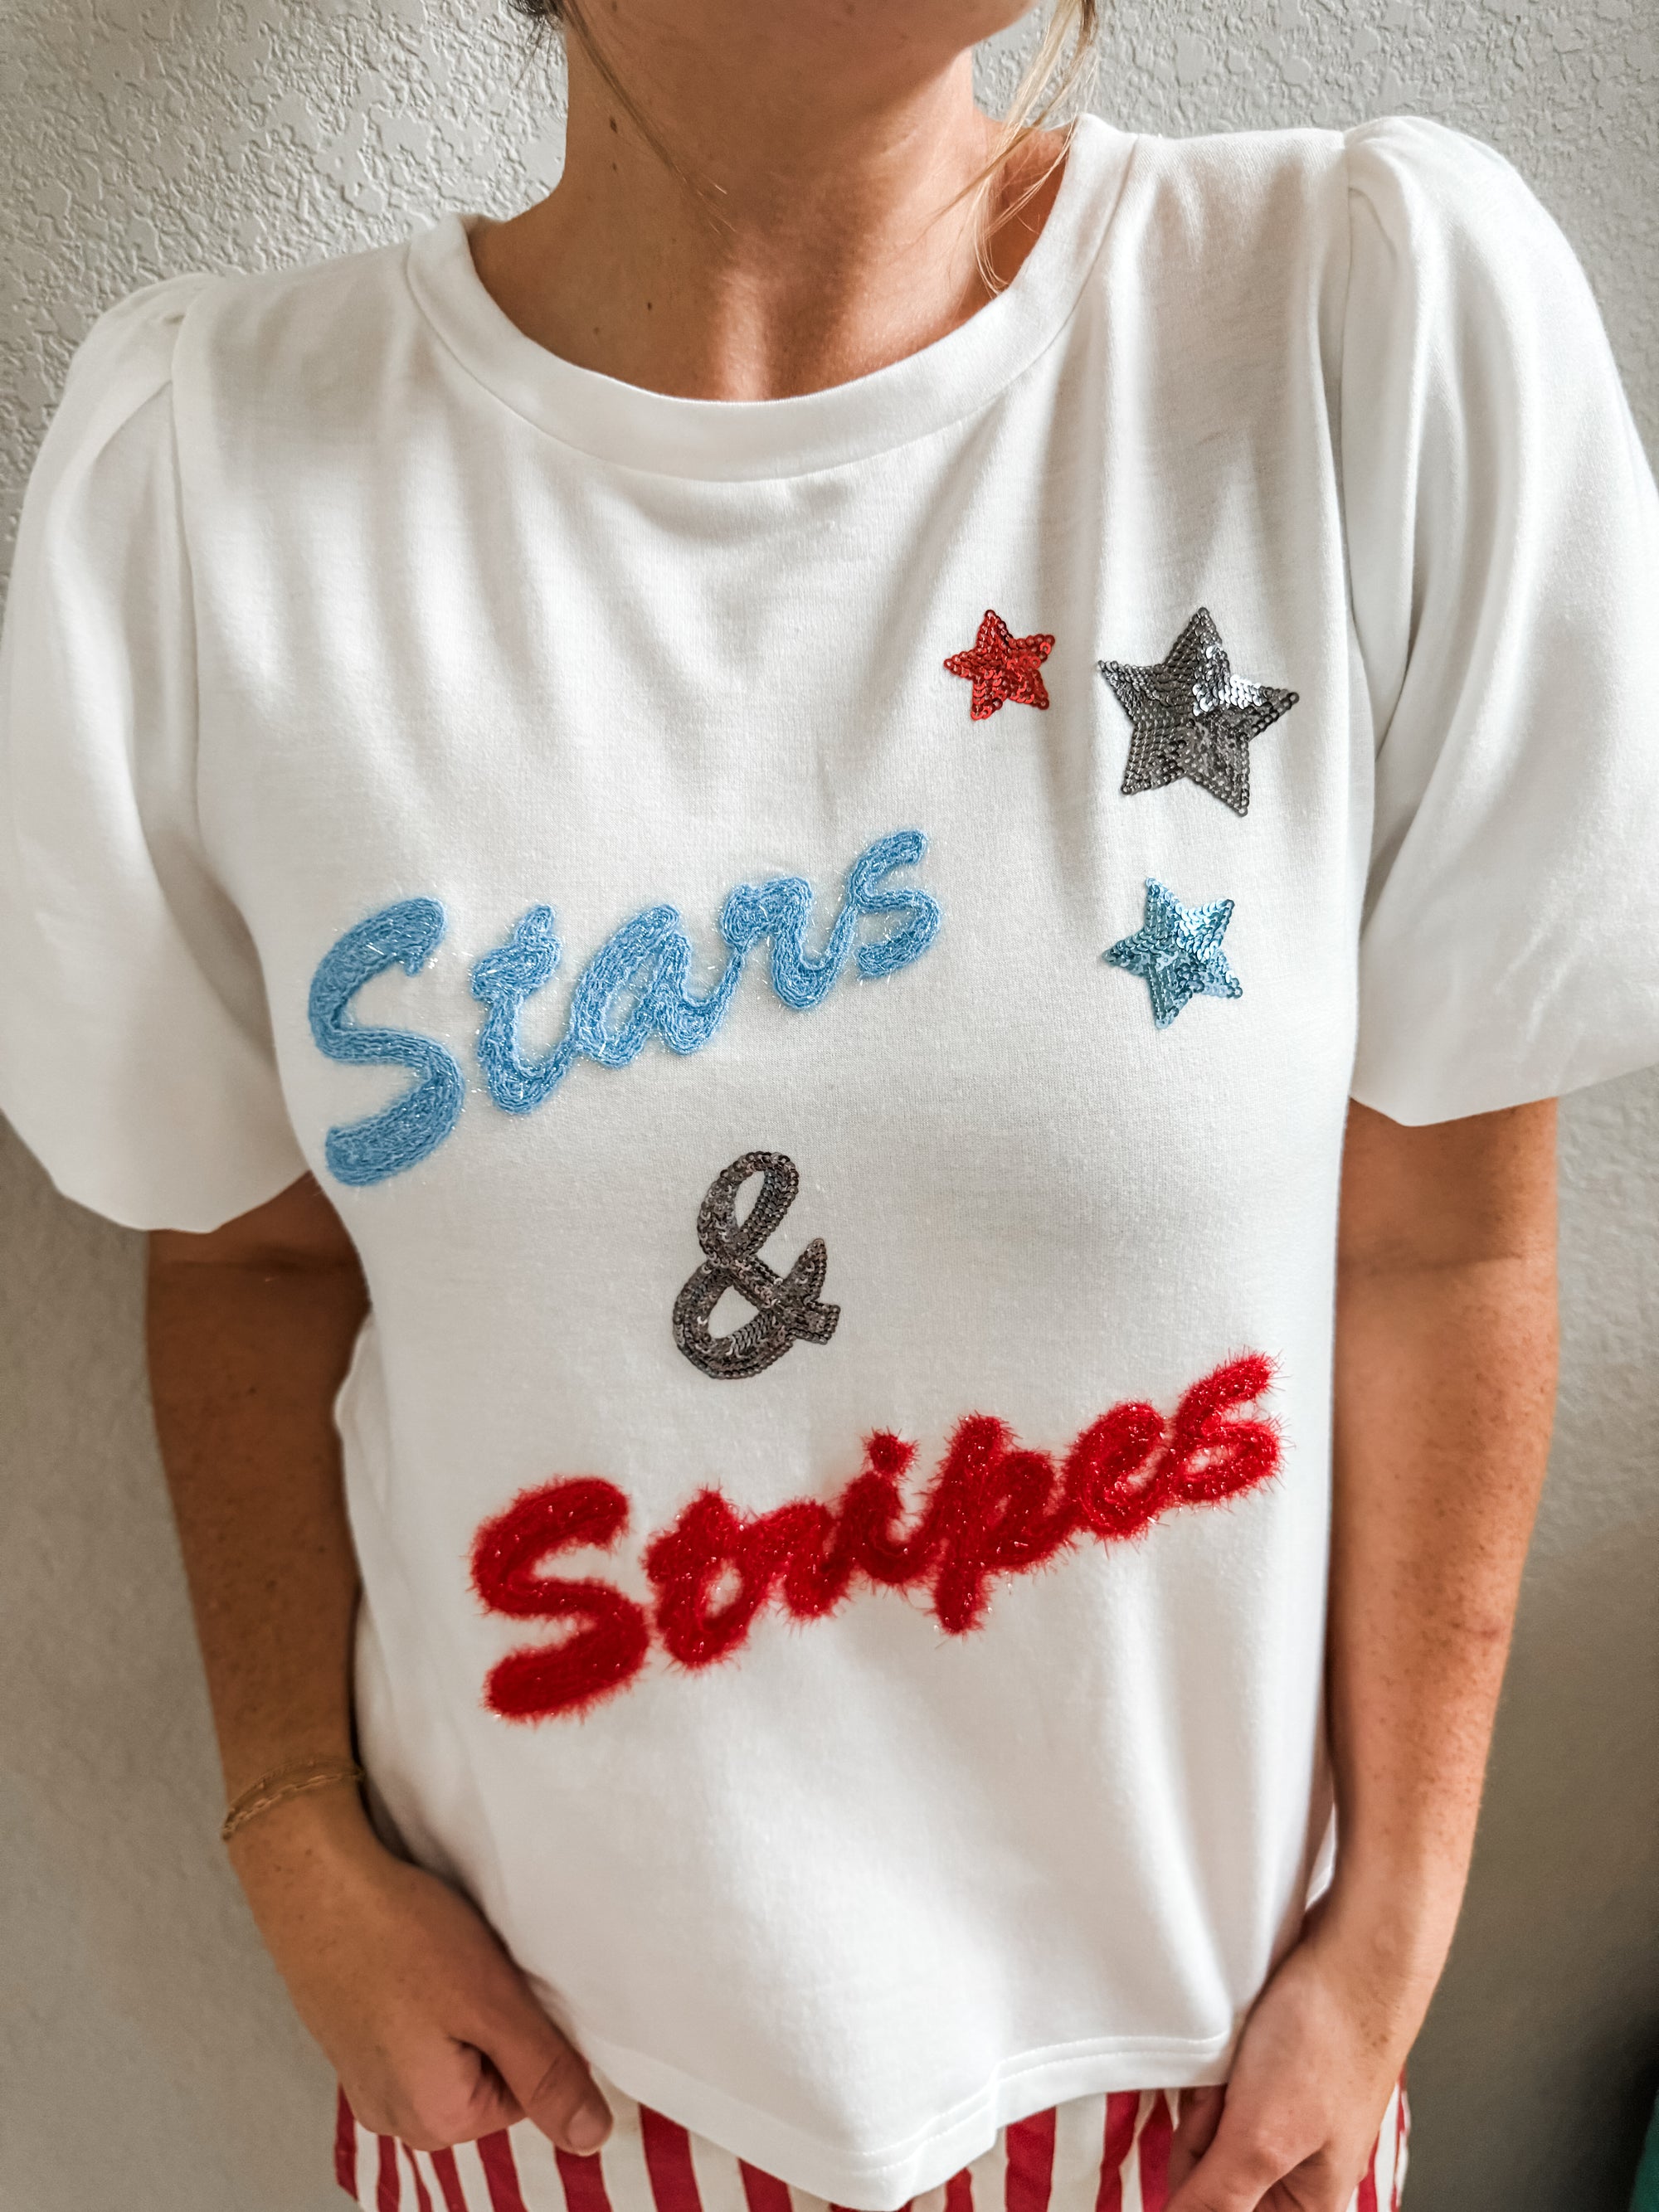 Its Giving Stars & Stripes Top